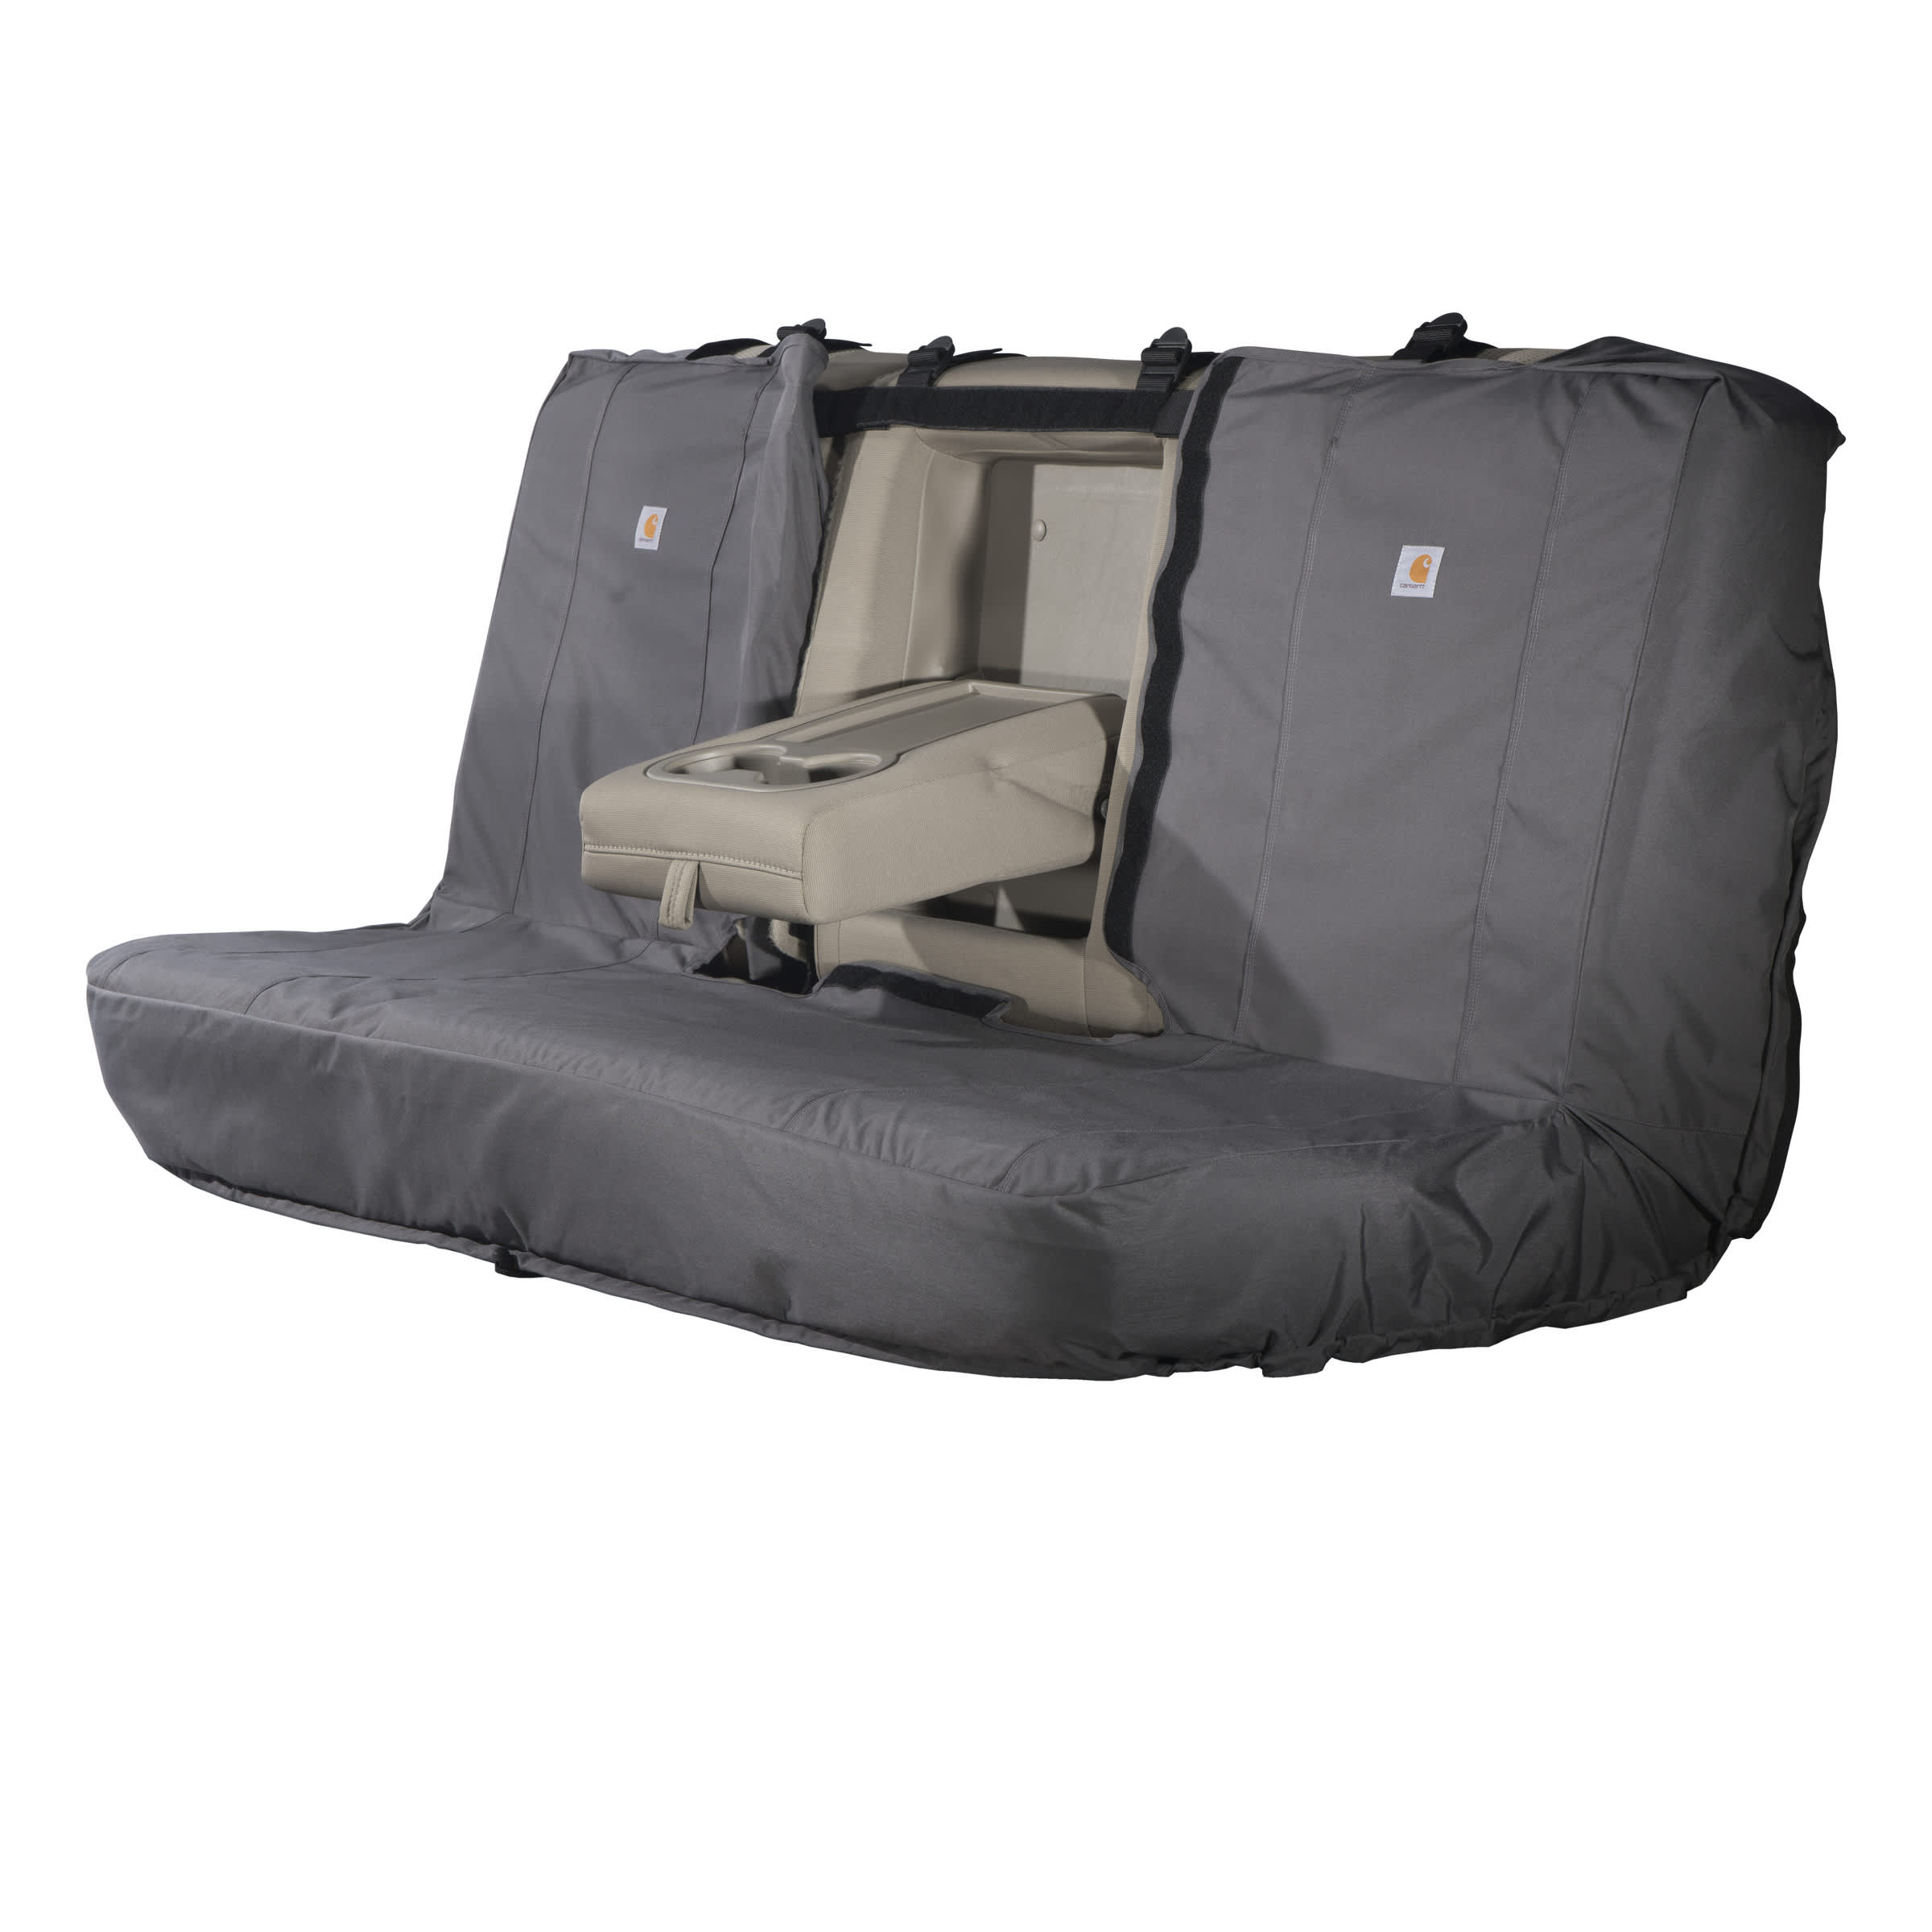 Carhartt® Universal Fit Nylon Duck Full-Size Bench Seat Cover